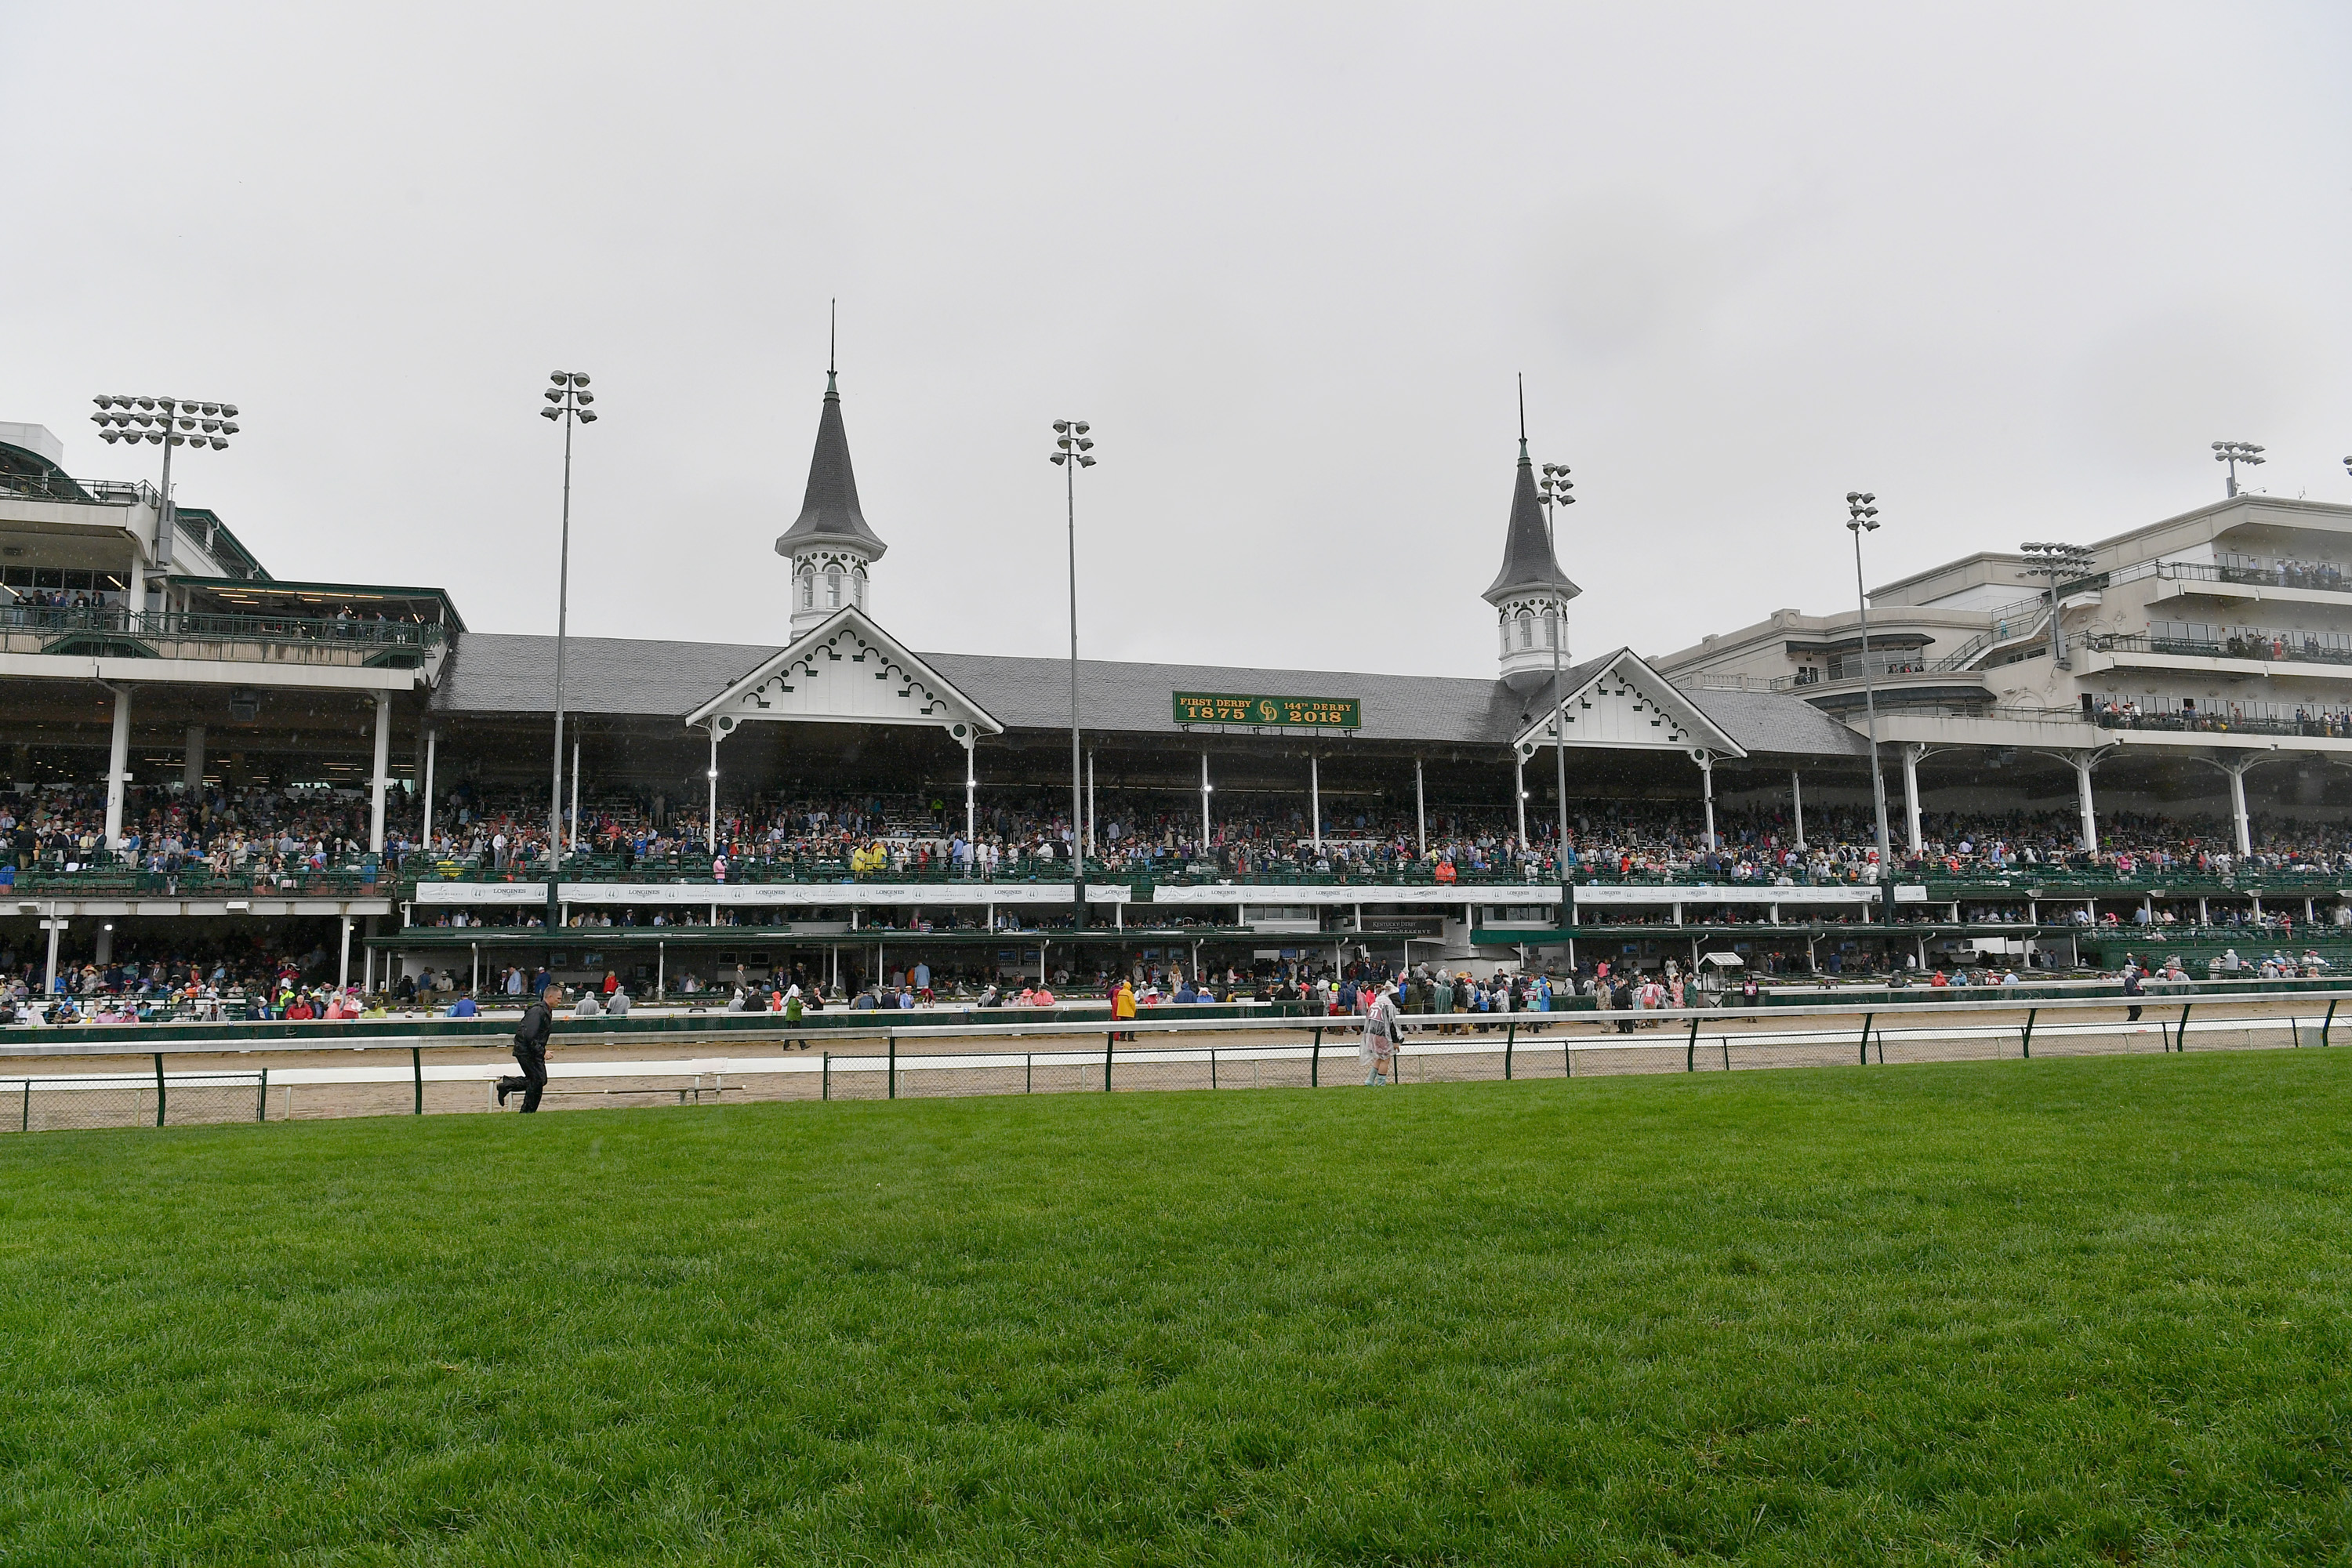 Kentucky Derby Fans Try to Move Past Controversy a Year After Medina Spirit